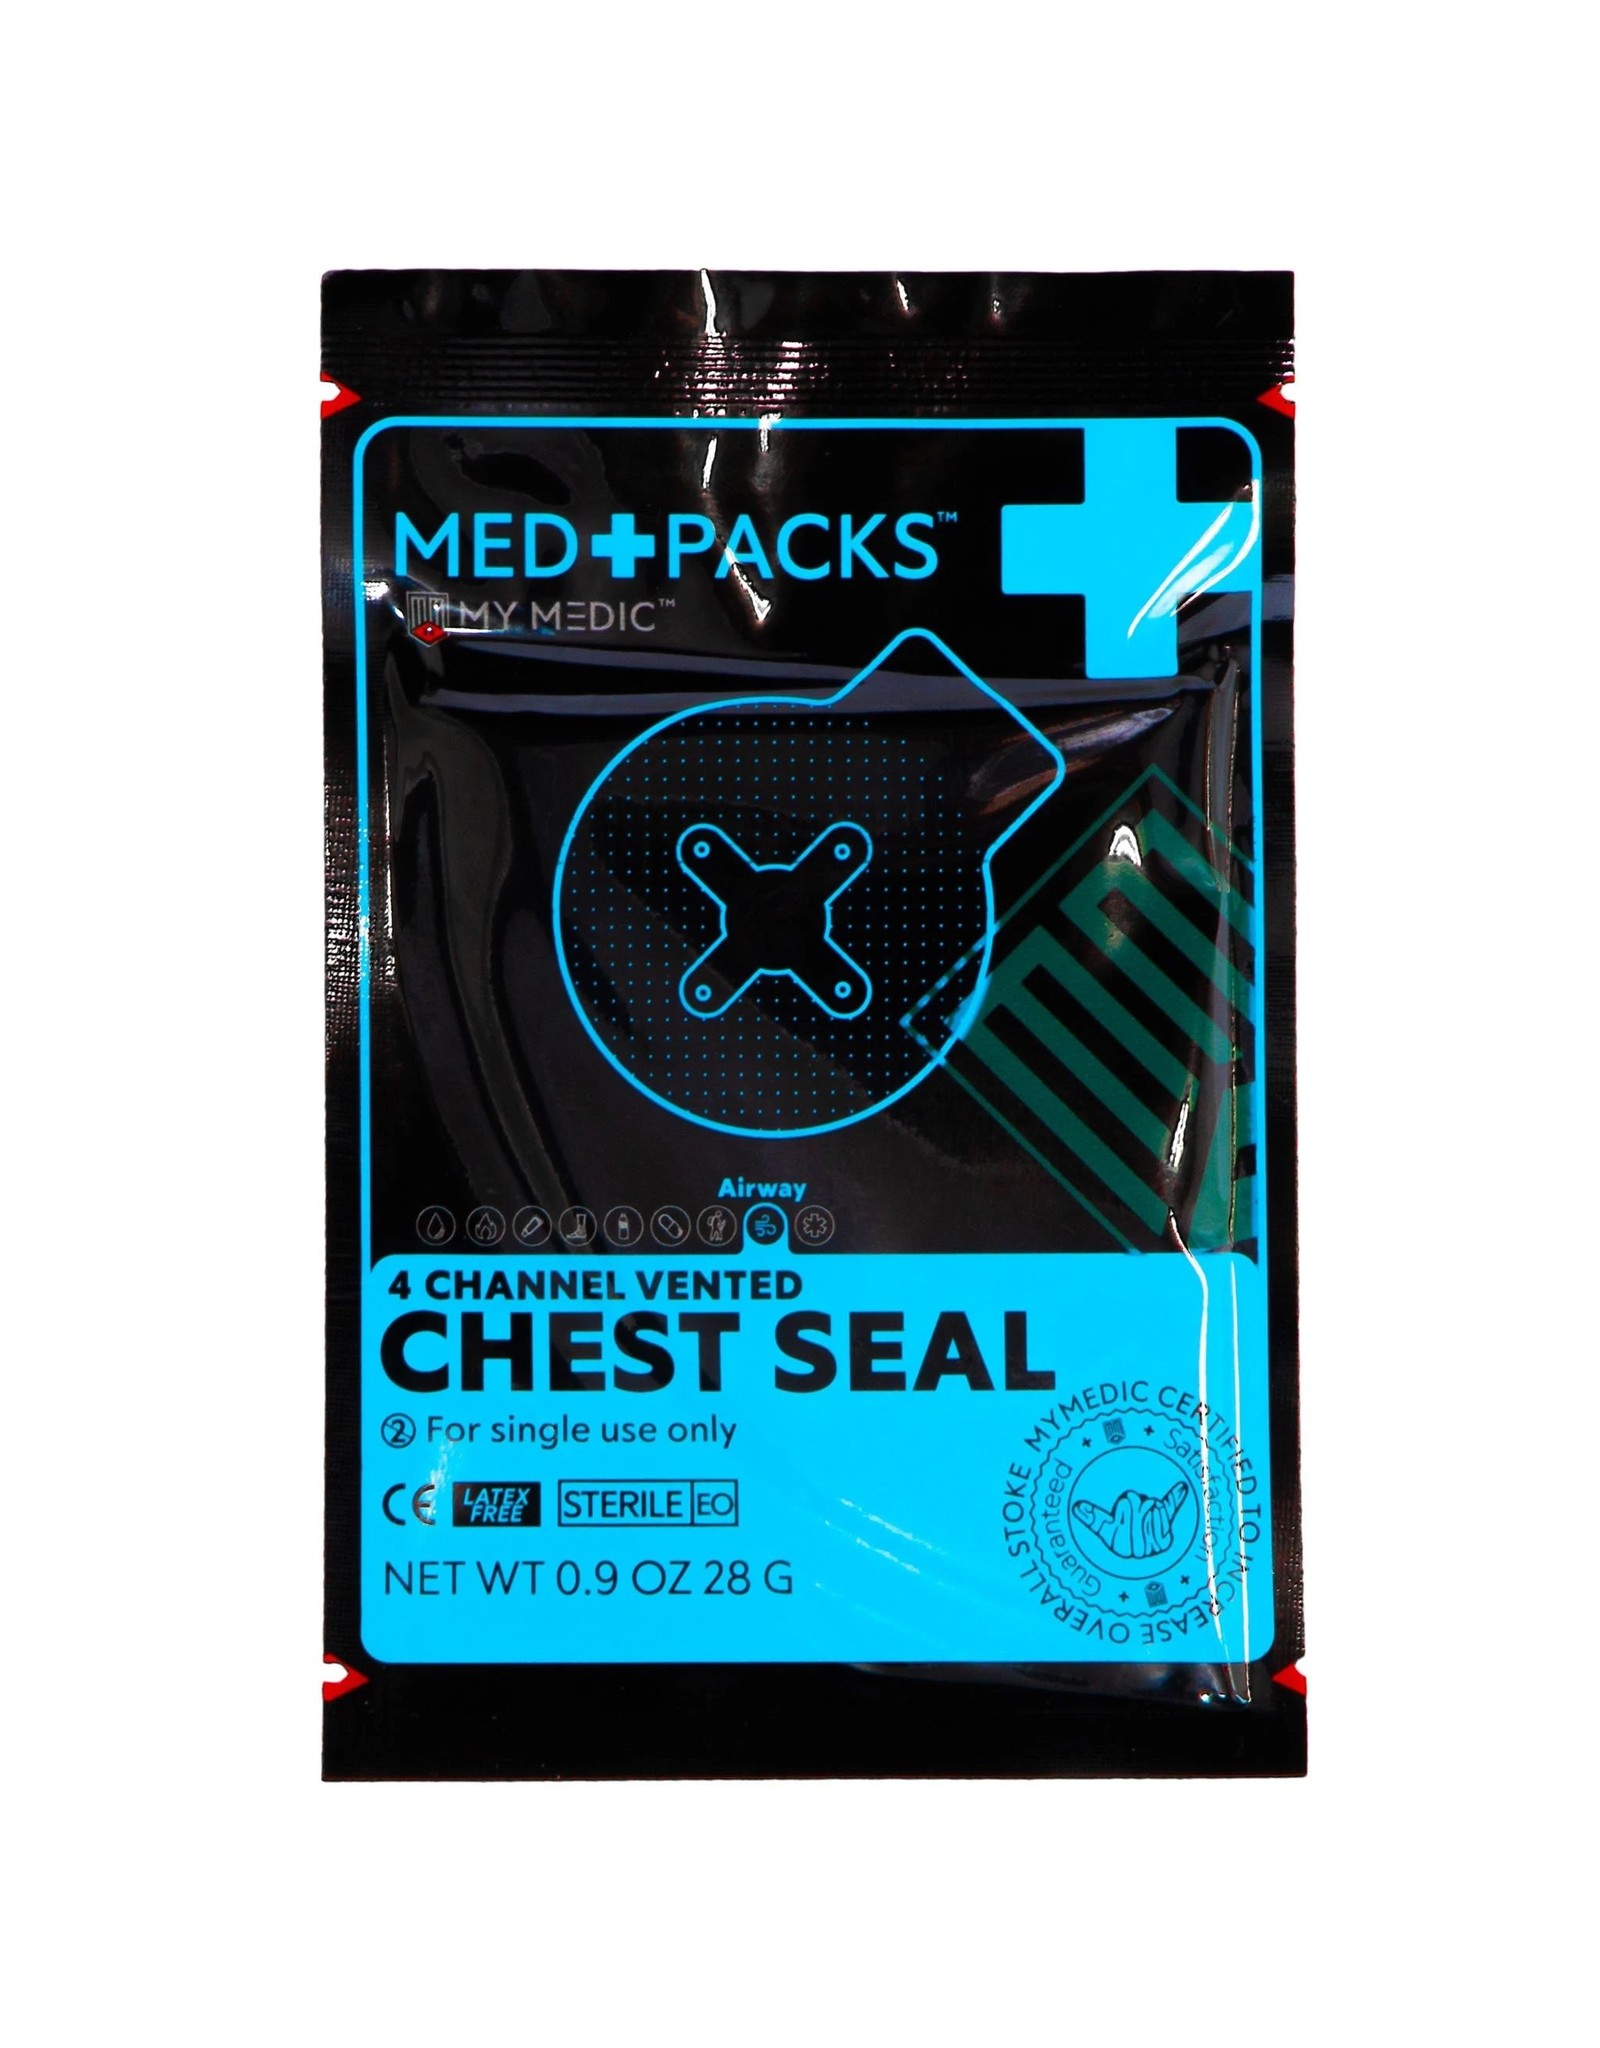 MyMedic Chest Seal - Vented